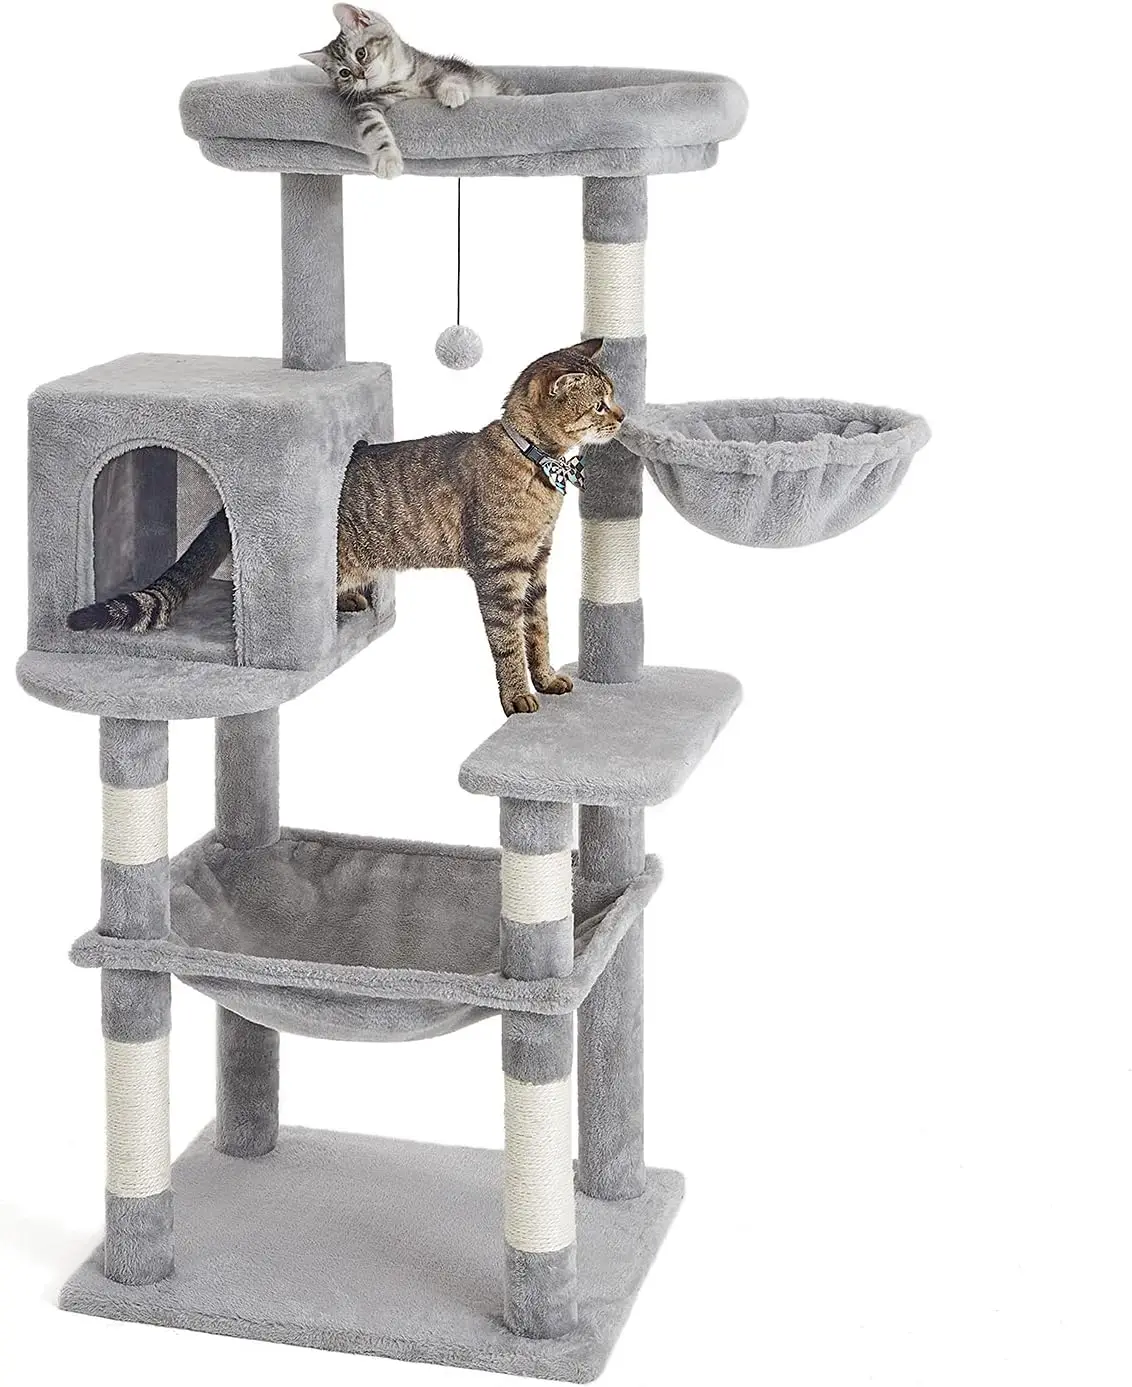 

Inches Multi-Level Cat Tree Condo,Cat Tower with Sisal Scratching Post, Plush Perches,Hammock,Kitten Playhouse